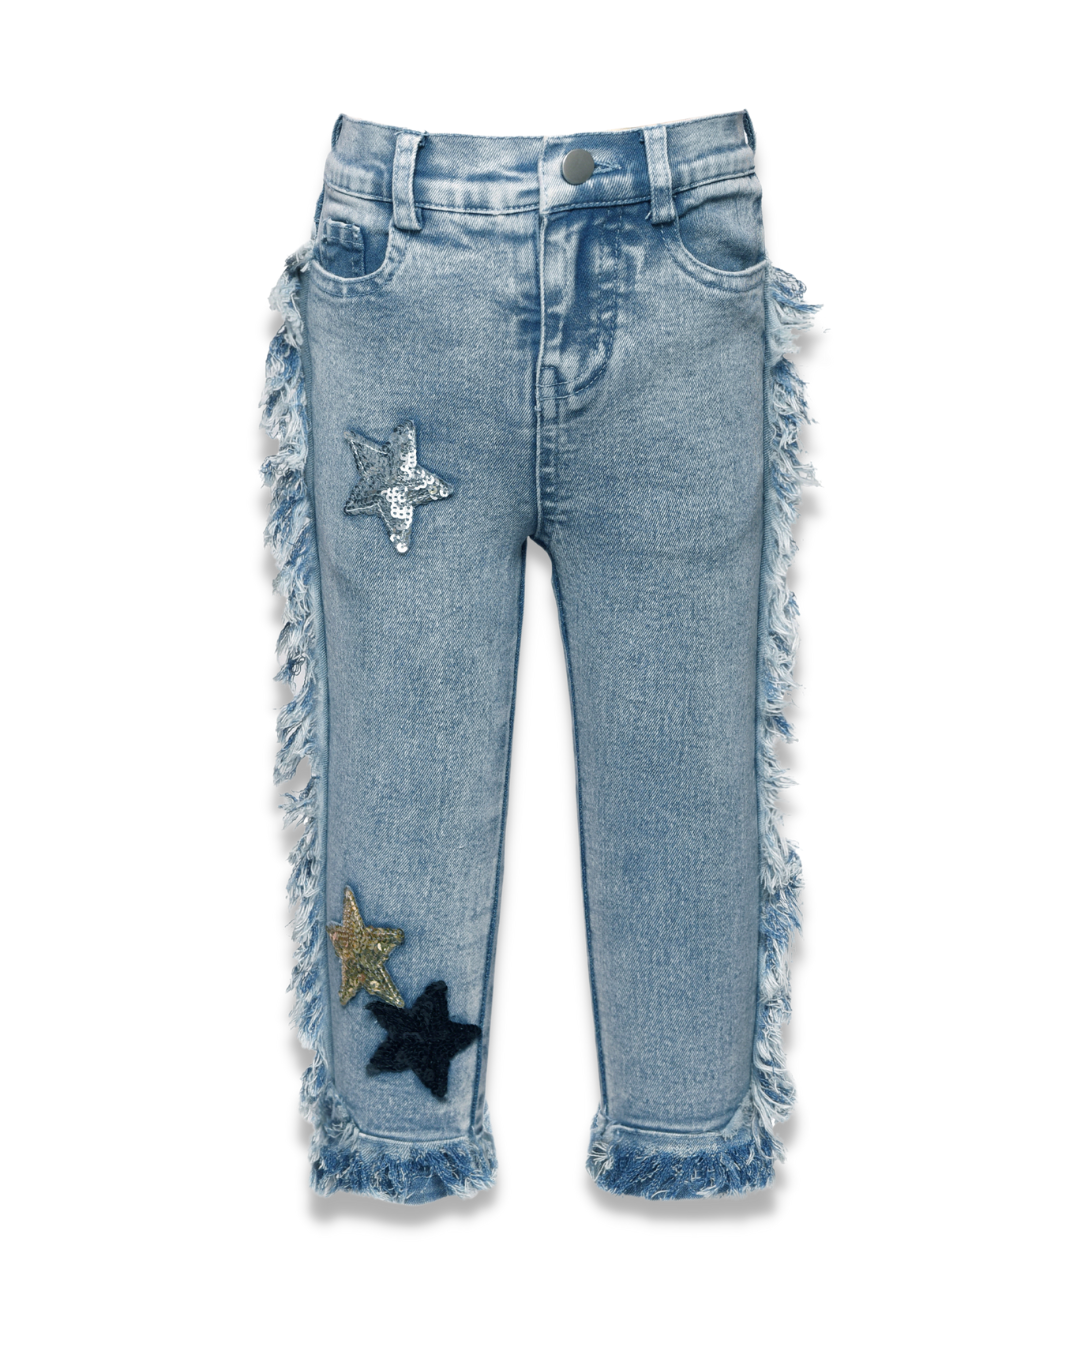 Denim Pants with Star Patches & Frayed Edge Detail